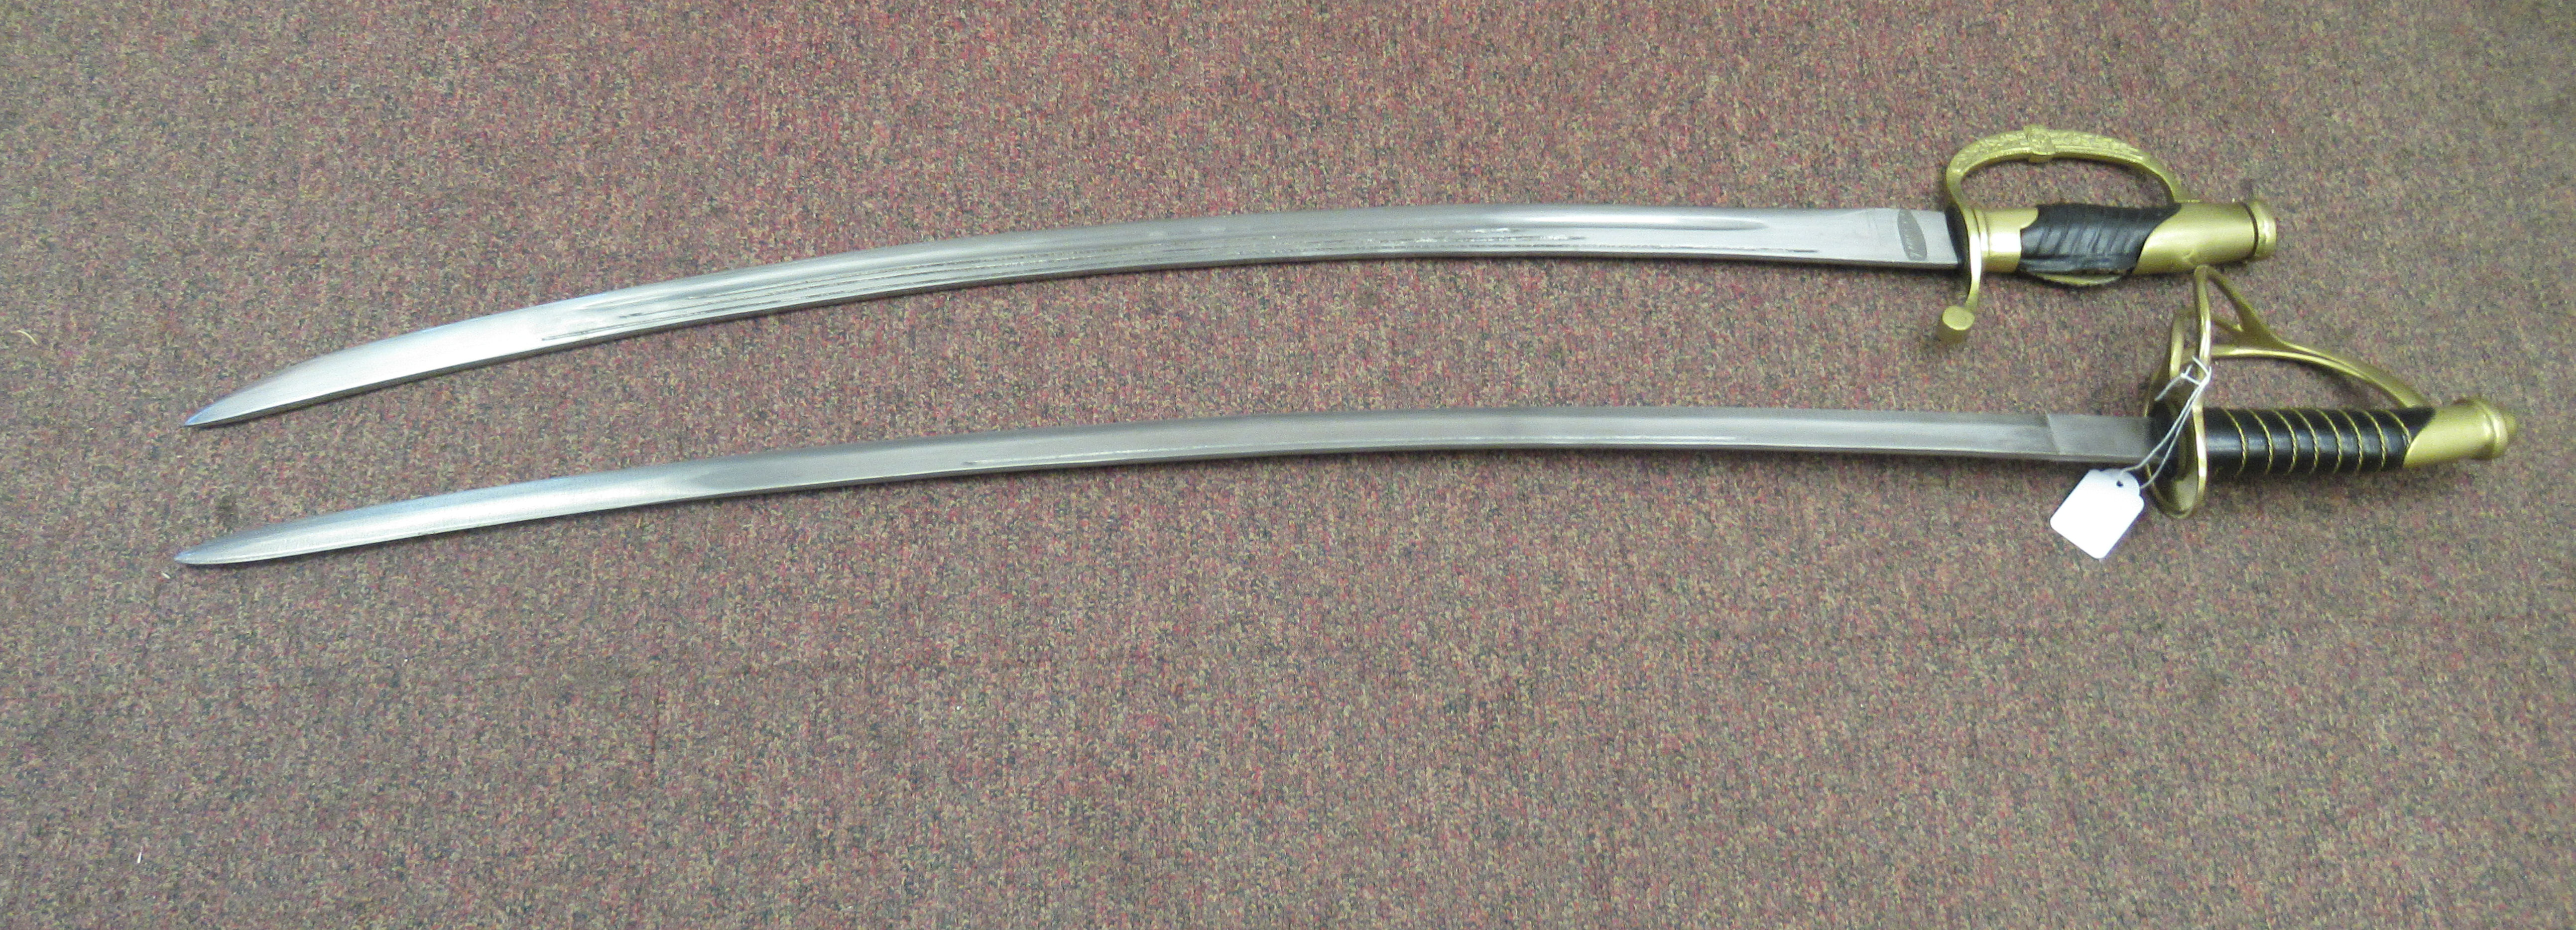 Two similar replica 18thC sabres with fabric covered handles, brass knuckle guards and hilts, the - Image 2 of 7